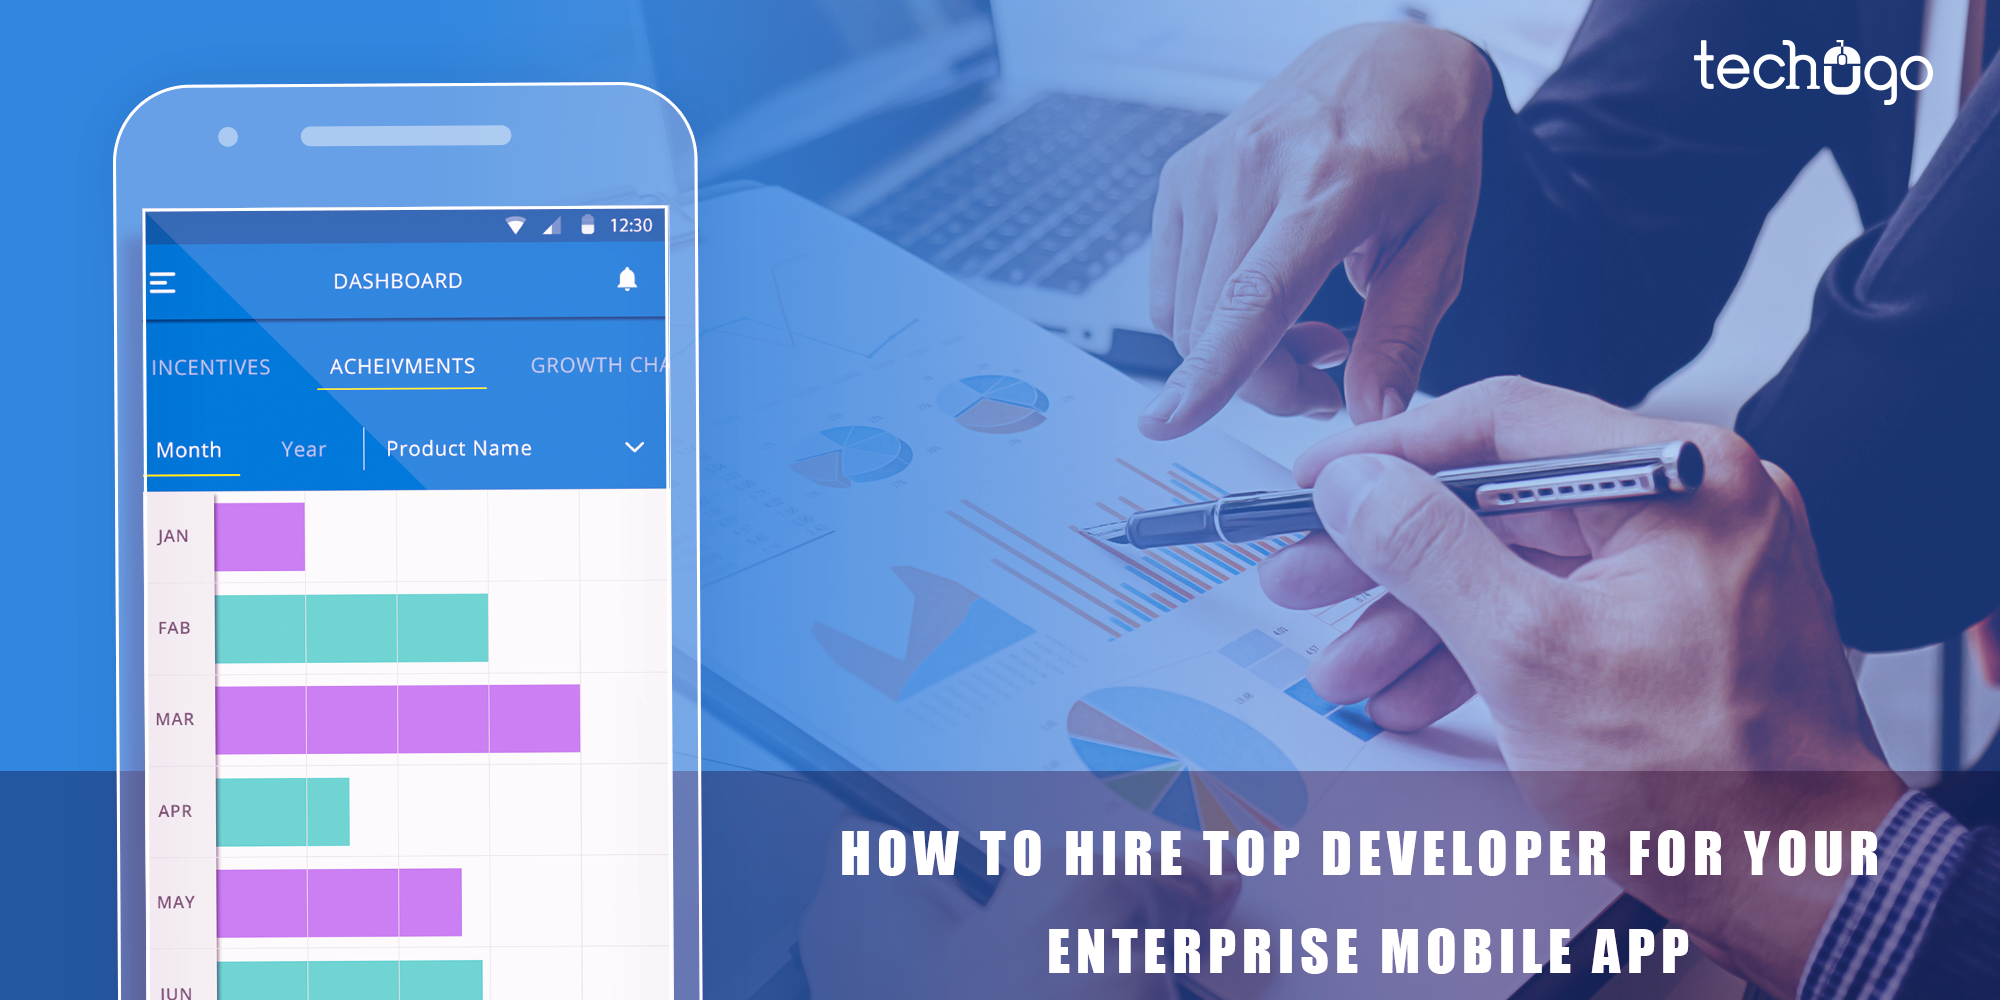 HOW TO HIRE TOP DEVELOPER FOR YOUR ENTERPRISE MOBILE APP